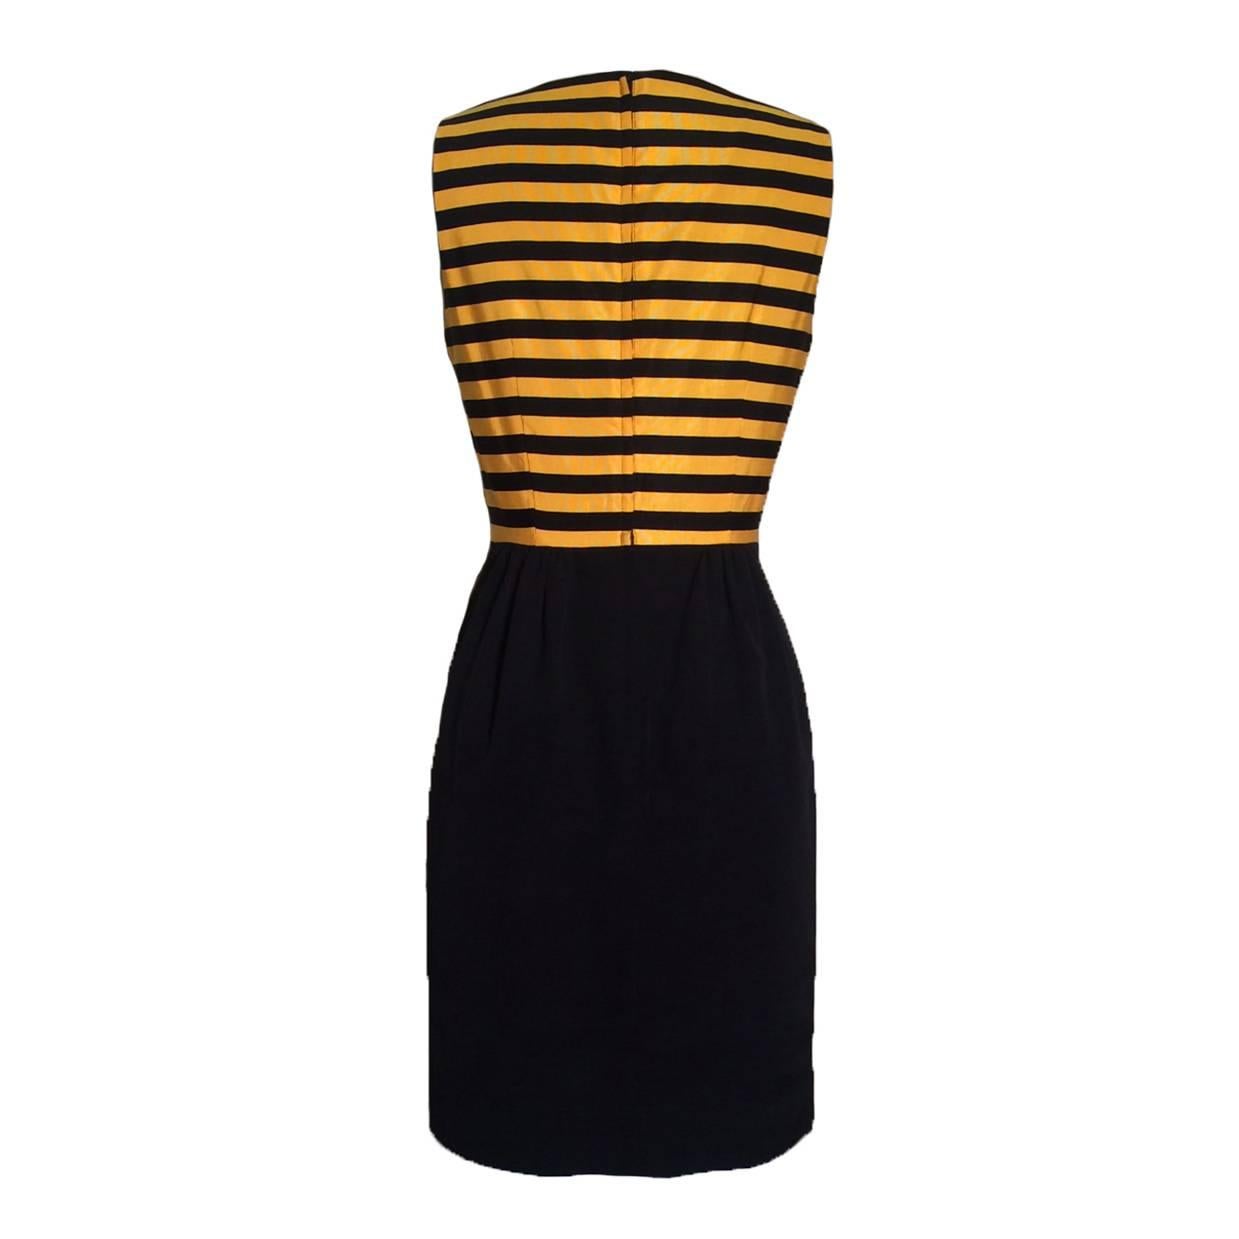 Moschino Cheap & Chic vintage 1980s yellow and black bumble bee stripe dress. Back zip.

Cloth 1: 70% cotton, 30% rayon. 
Cloth 2: 60% cotton 40% rayon.
Fully lined in 60% acetate 40% rayon.

Made in Italy.

Labelled IT 42, US 8. Fits like 